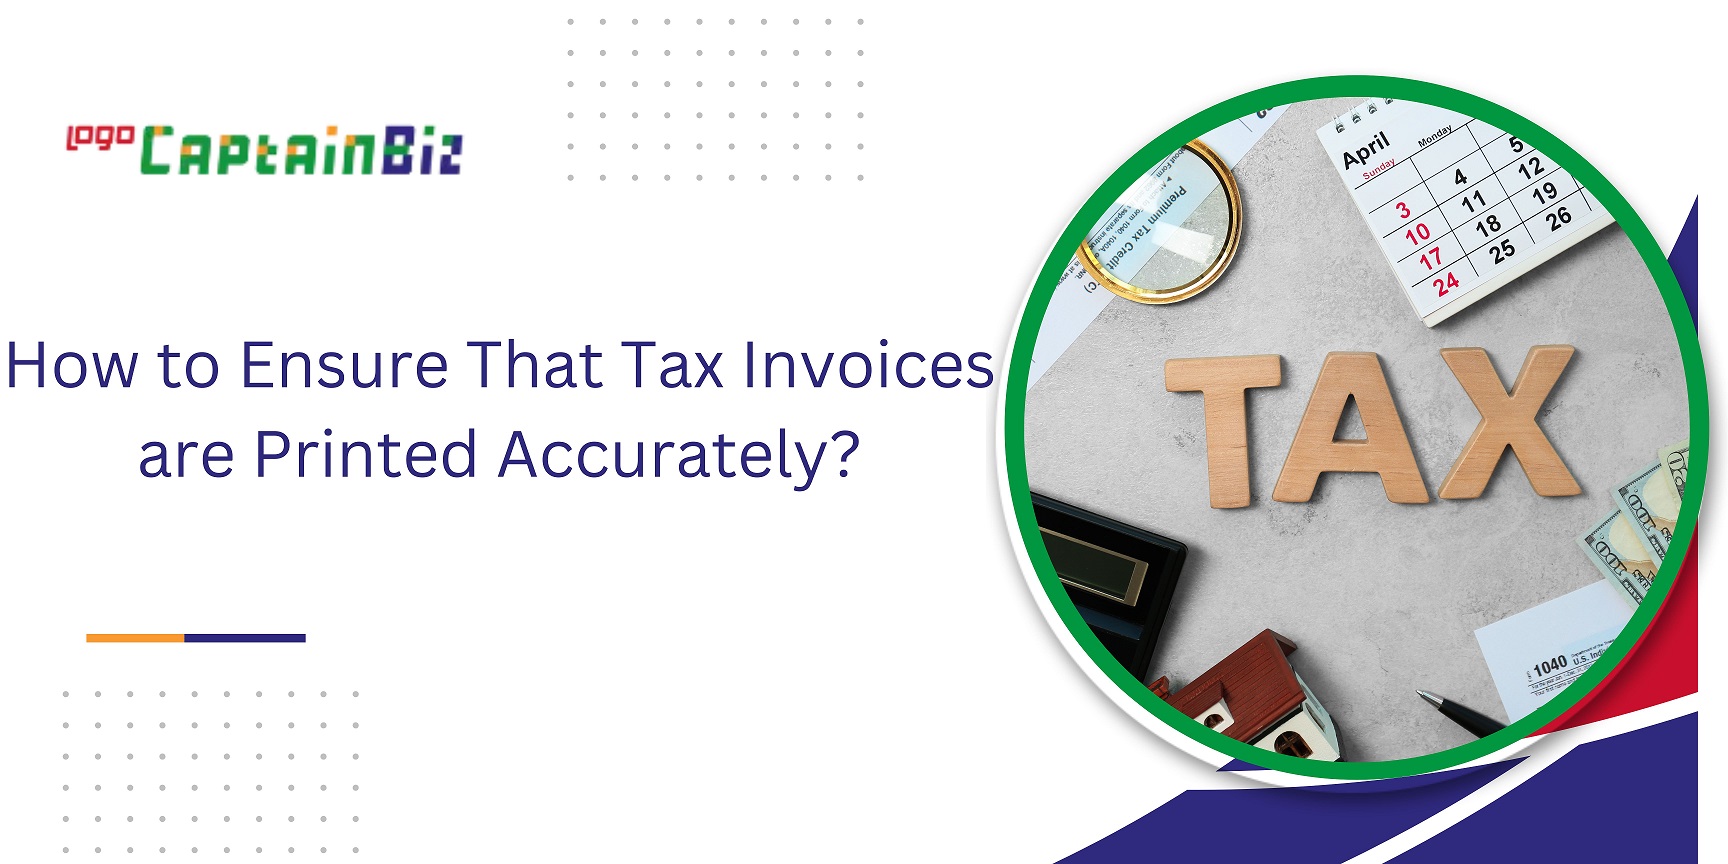 CaptainBiz: How to Ensure That Tax Invoices are Printed Accurately